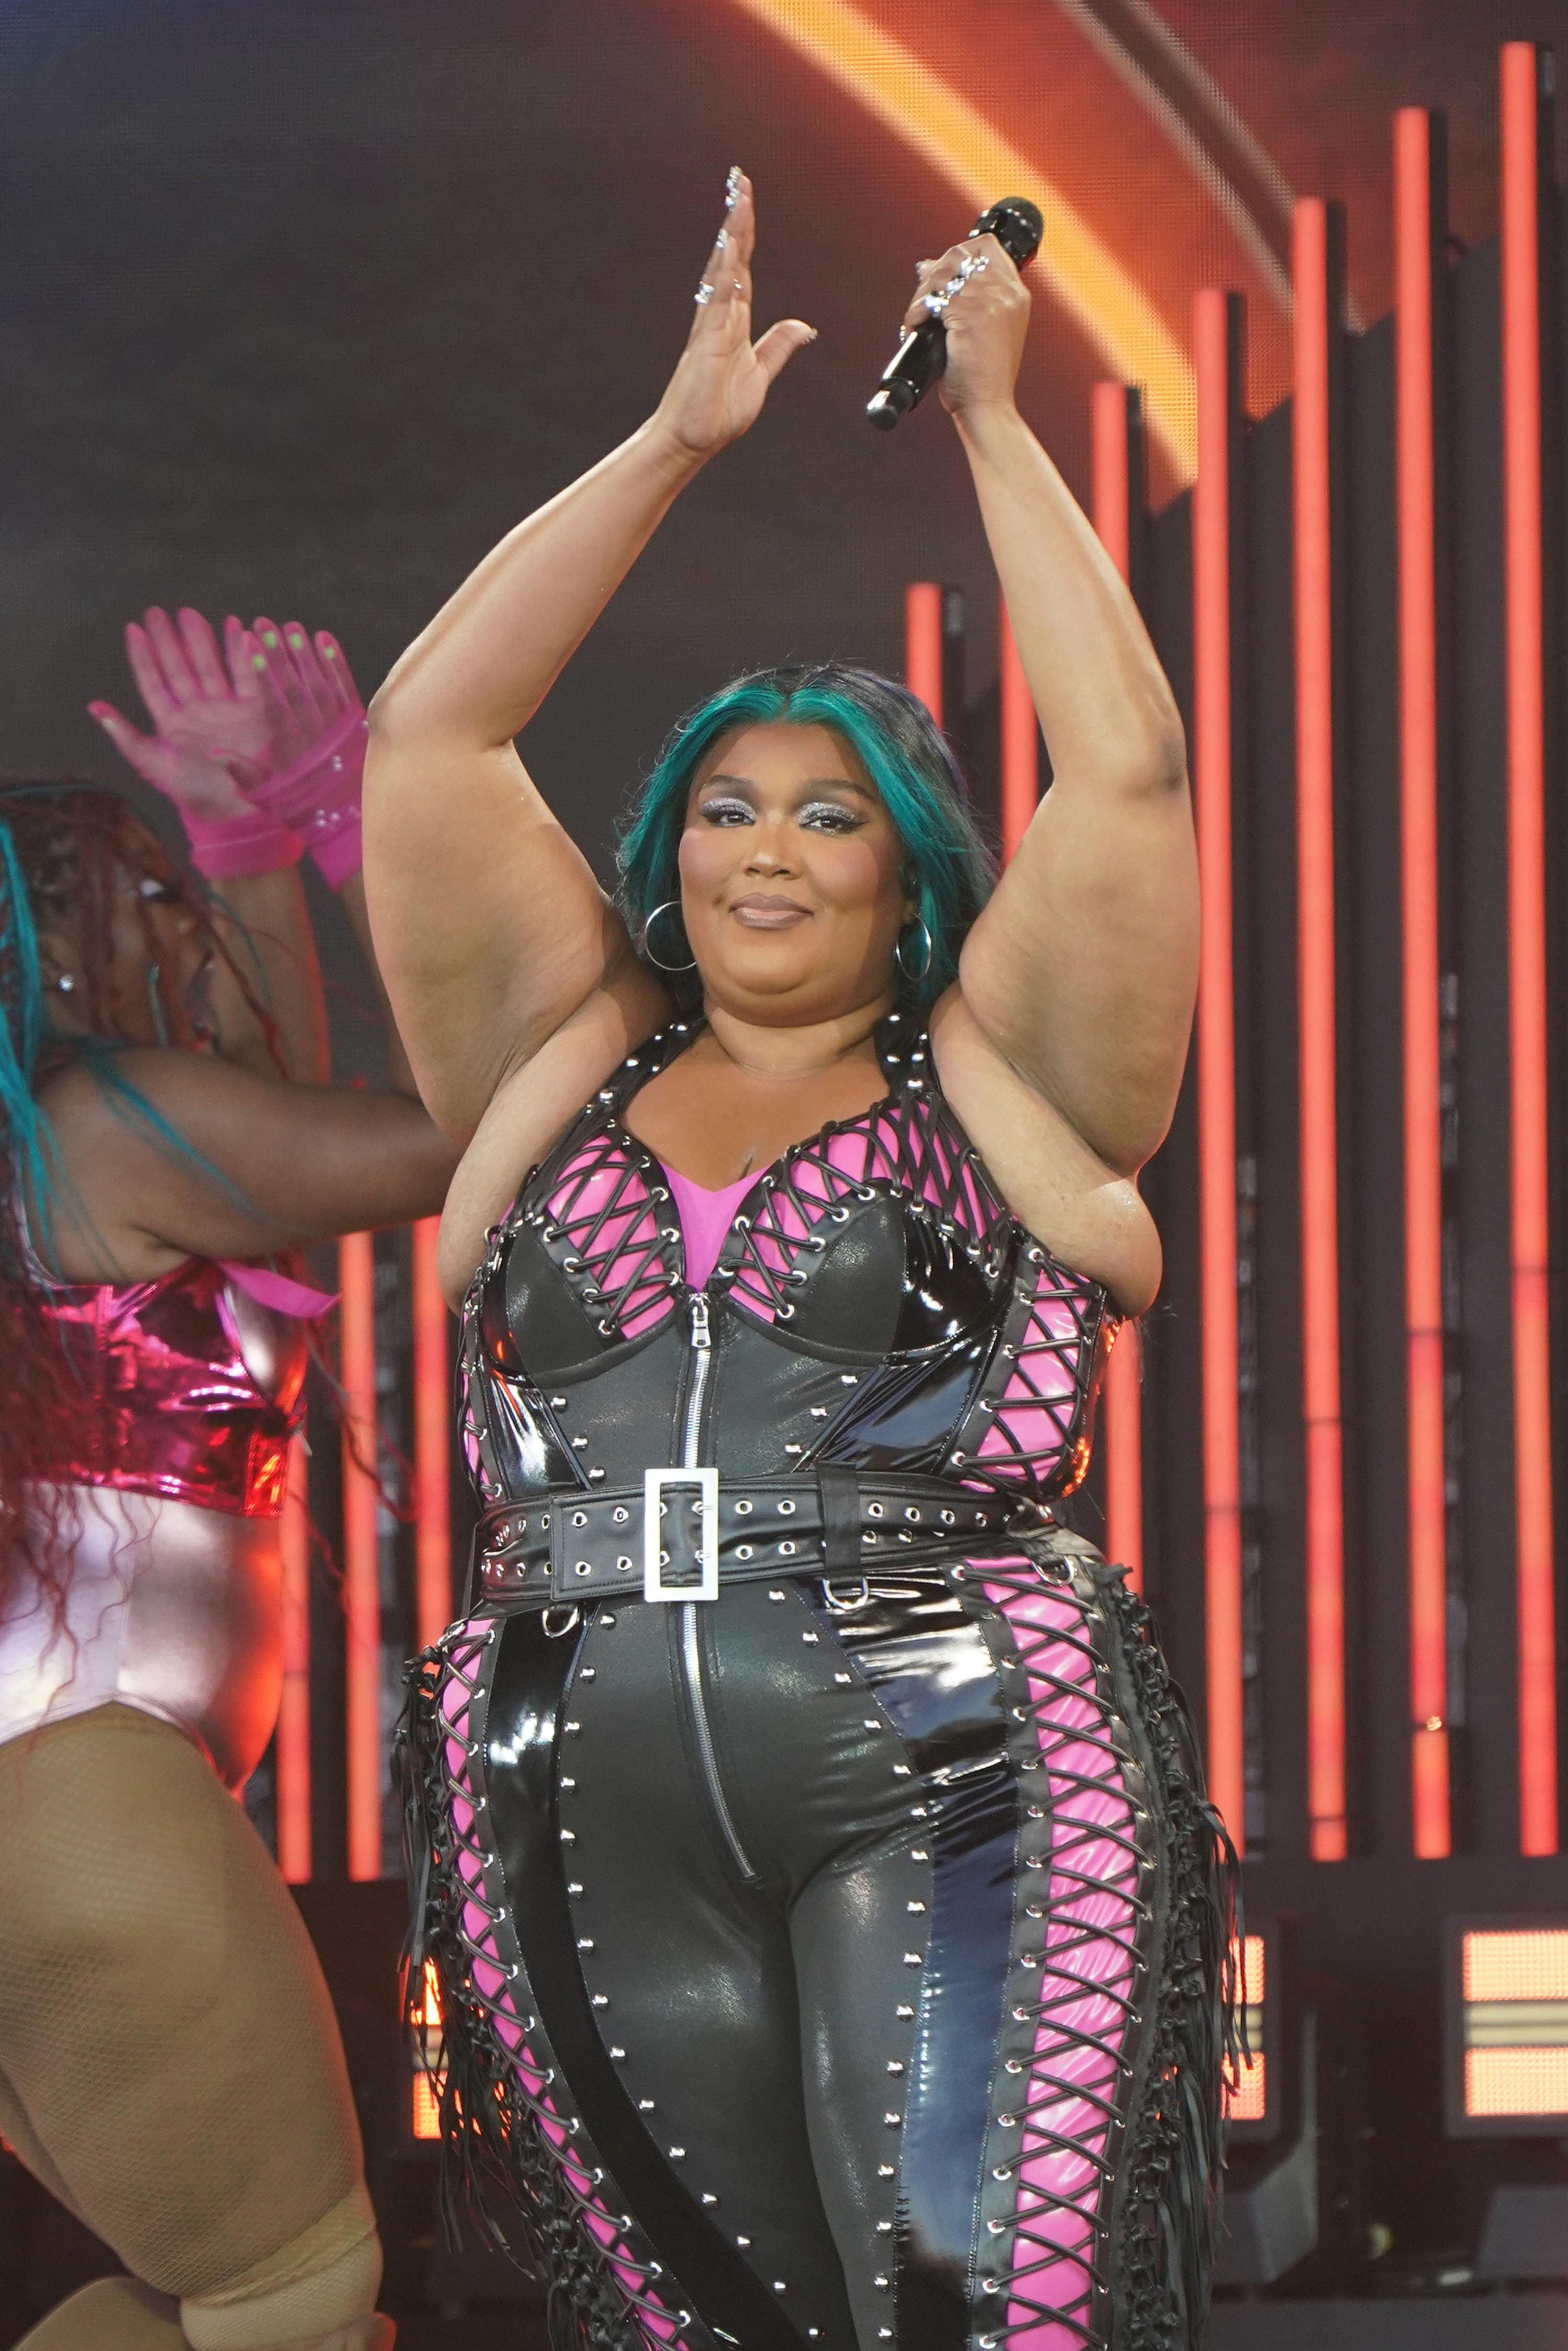 Three of Lizzo’s former dancers accused her of sexual harassment and the creation of a hostile work environment earlier this month.